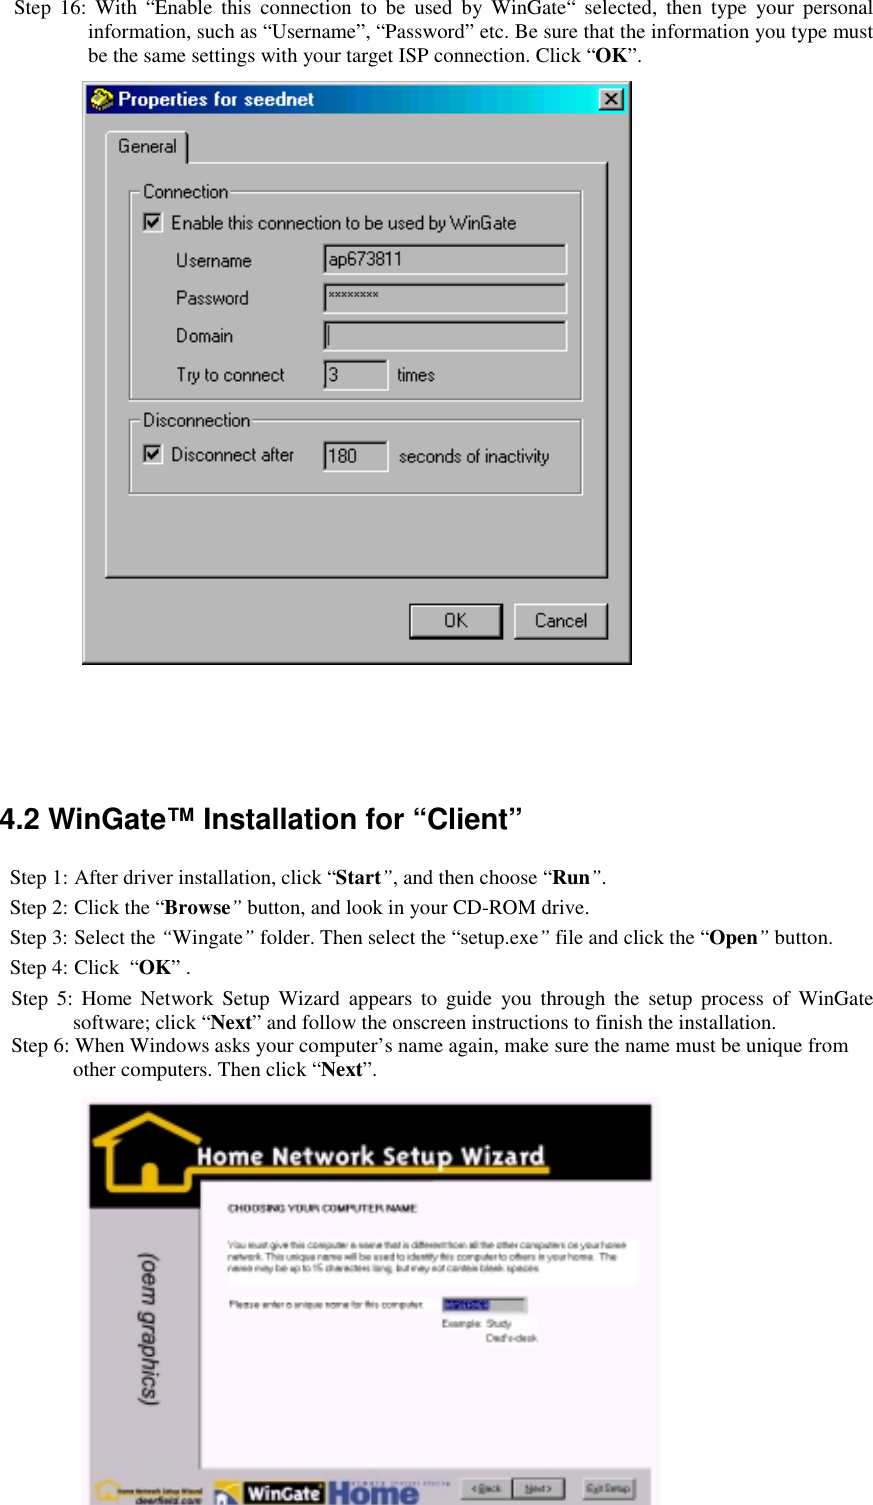 17Step 16: With “Enable this connection to be used by WinGate“ selected, then type your personalinformation, such as “Username”, “Password” etc. Be sure that the information you type mustbe the same settings with your target ISP connection. Click “OK”.4.2 WinGate™ Installation for “Client”Step 1: After driver installation, click “Start”, and then choose “Run”.Step 2: Click the “Browse” button, and look in your CD-ROM drive.Step 3: Select the “Wingate” folder. Then select the “setup.exe” file and click the “Open” button.Step 4: Click  “OK” .Step 5: Home Network Setup Wizard appears to guide you through the setup process of WinGatesoftware; click “Next” and follow the onscreen instructions to finish the installation.Step 6: When Windows asks your computer’s name again, make sure the name must be unique fromother computers. Then click “Next”.